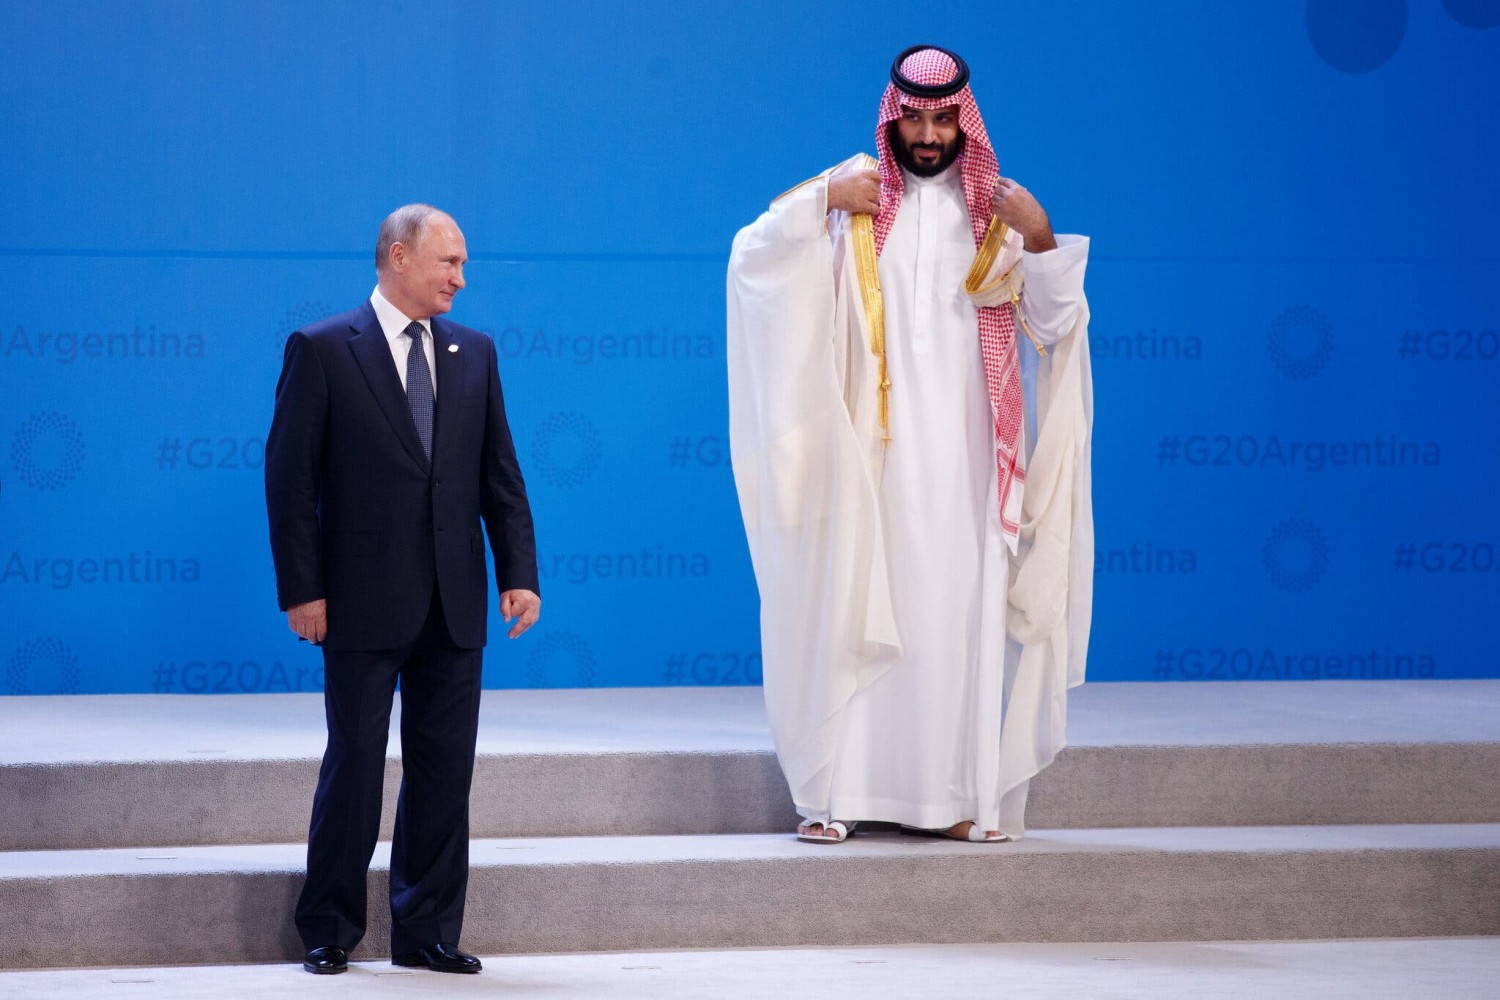 President Vladimir V. Putin of Russia and Crown Prince Mohammed bin Salman of Saudi Arabia at a Group of 20 summit in 2018. Oil efforts helped build ties between the leaders.Credit...Tom Brenner for The New York Times